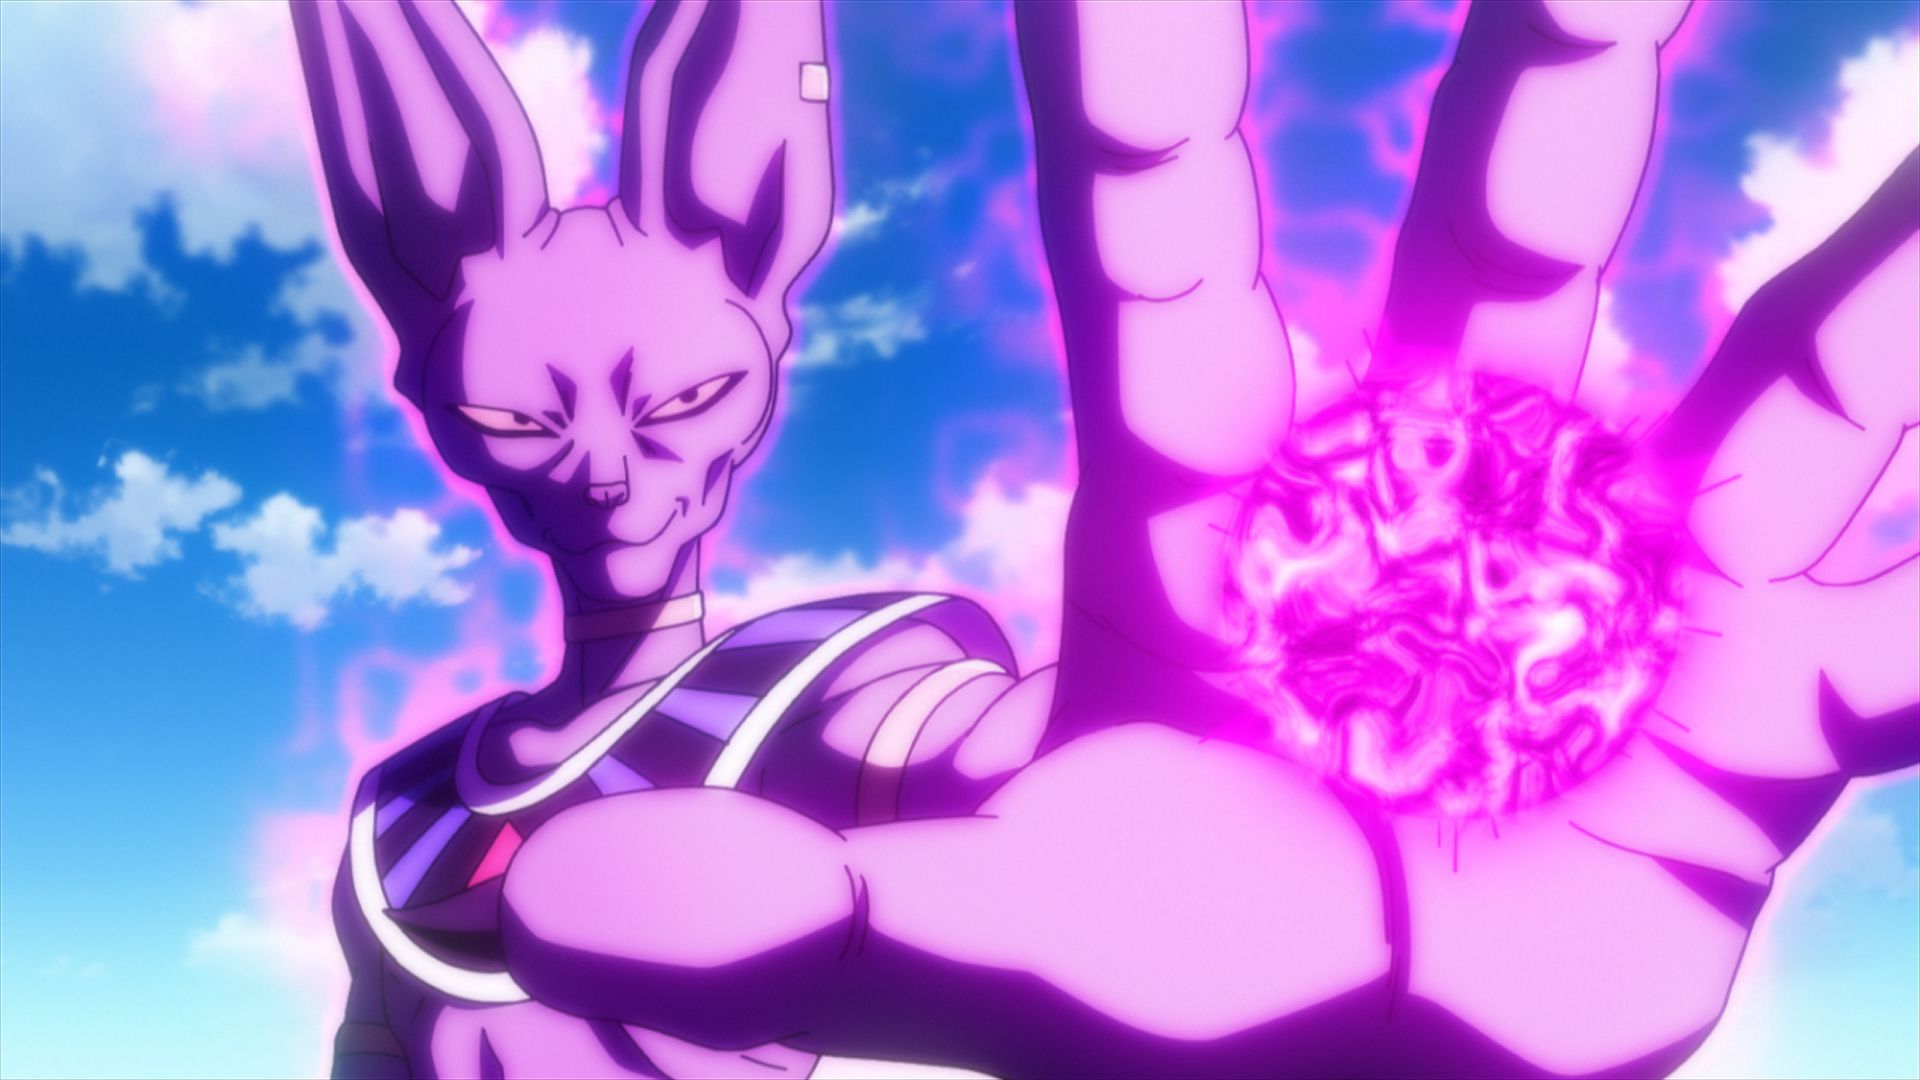 Download Beerus the destroyer dbz ball z wallpaper for your mobile cell phone